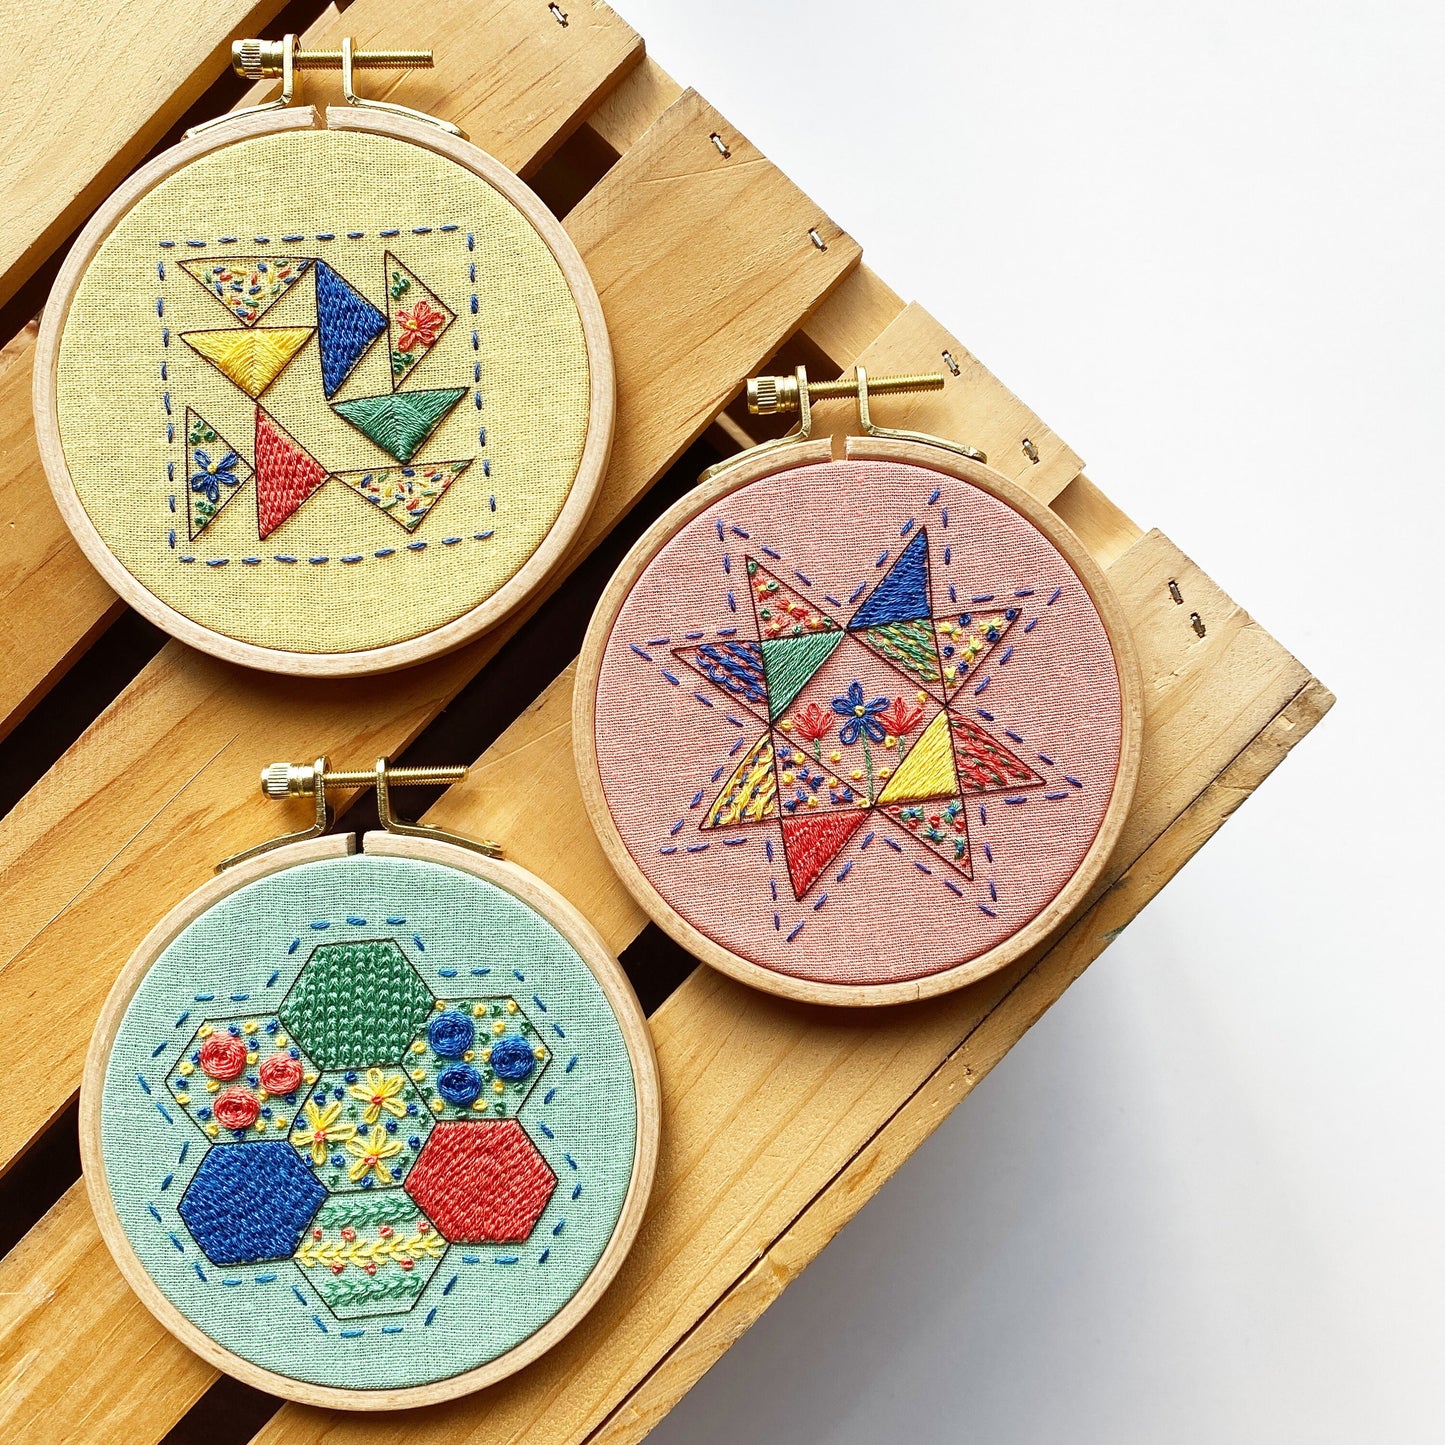 The Fungis: Beginner Embroidery Kit – Rosanna Diggs Embroidery